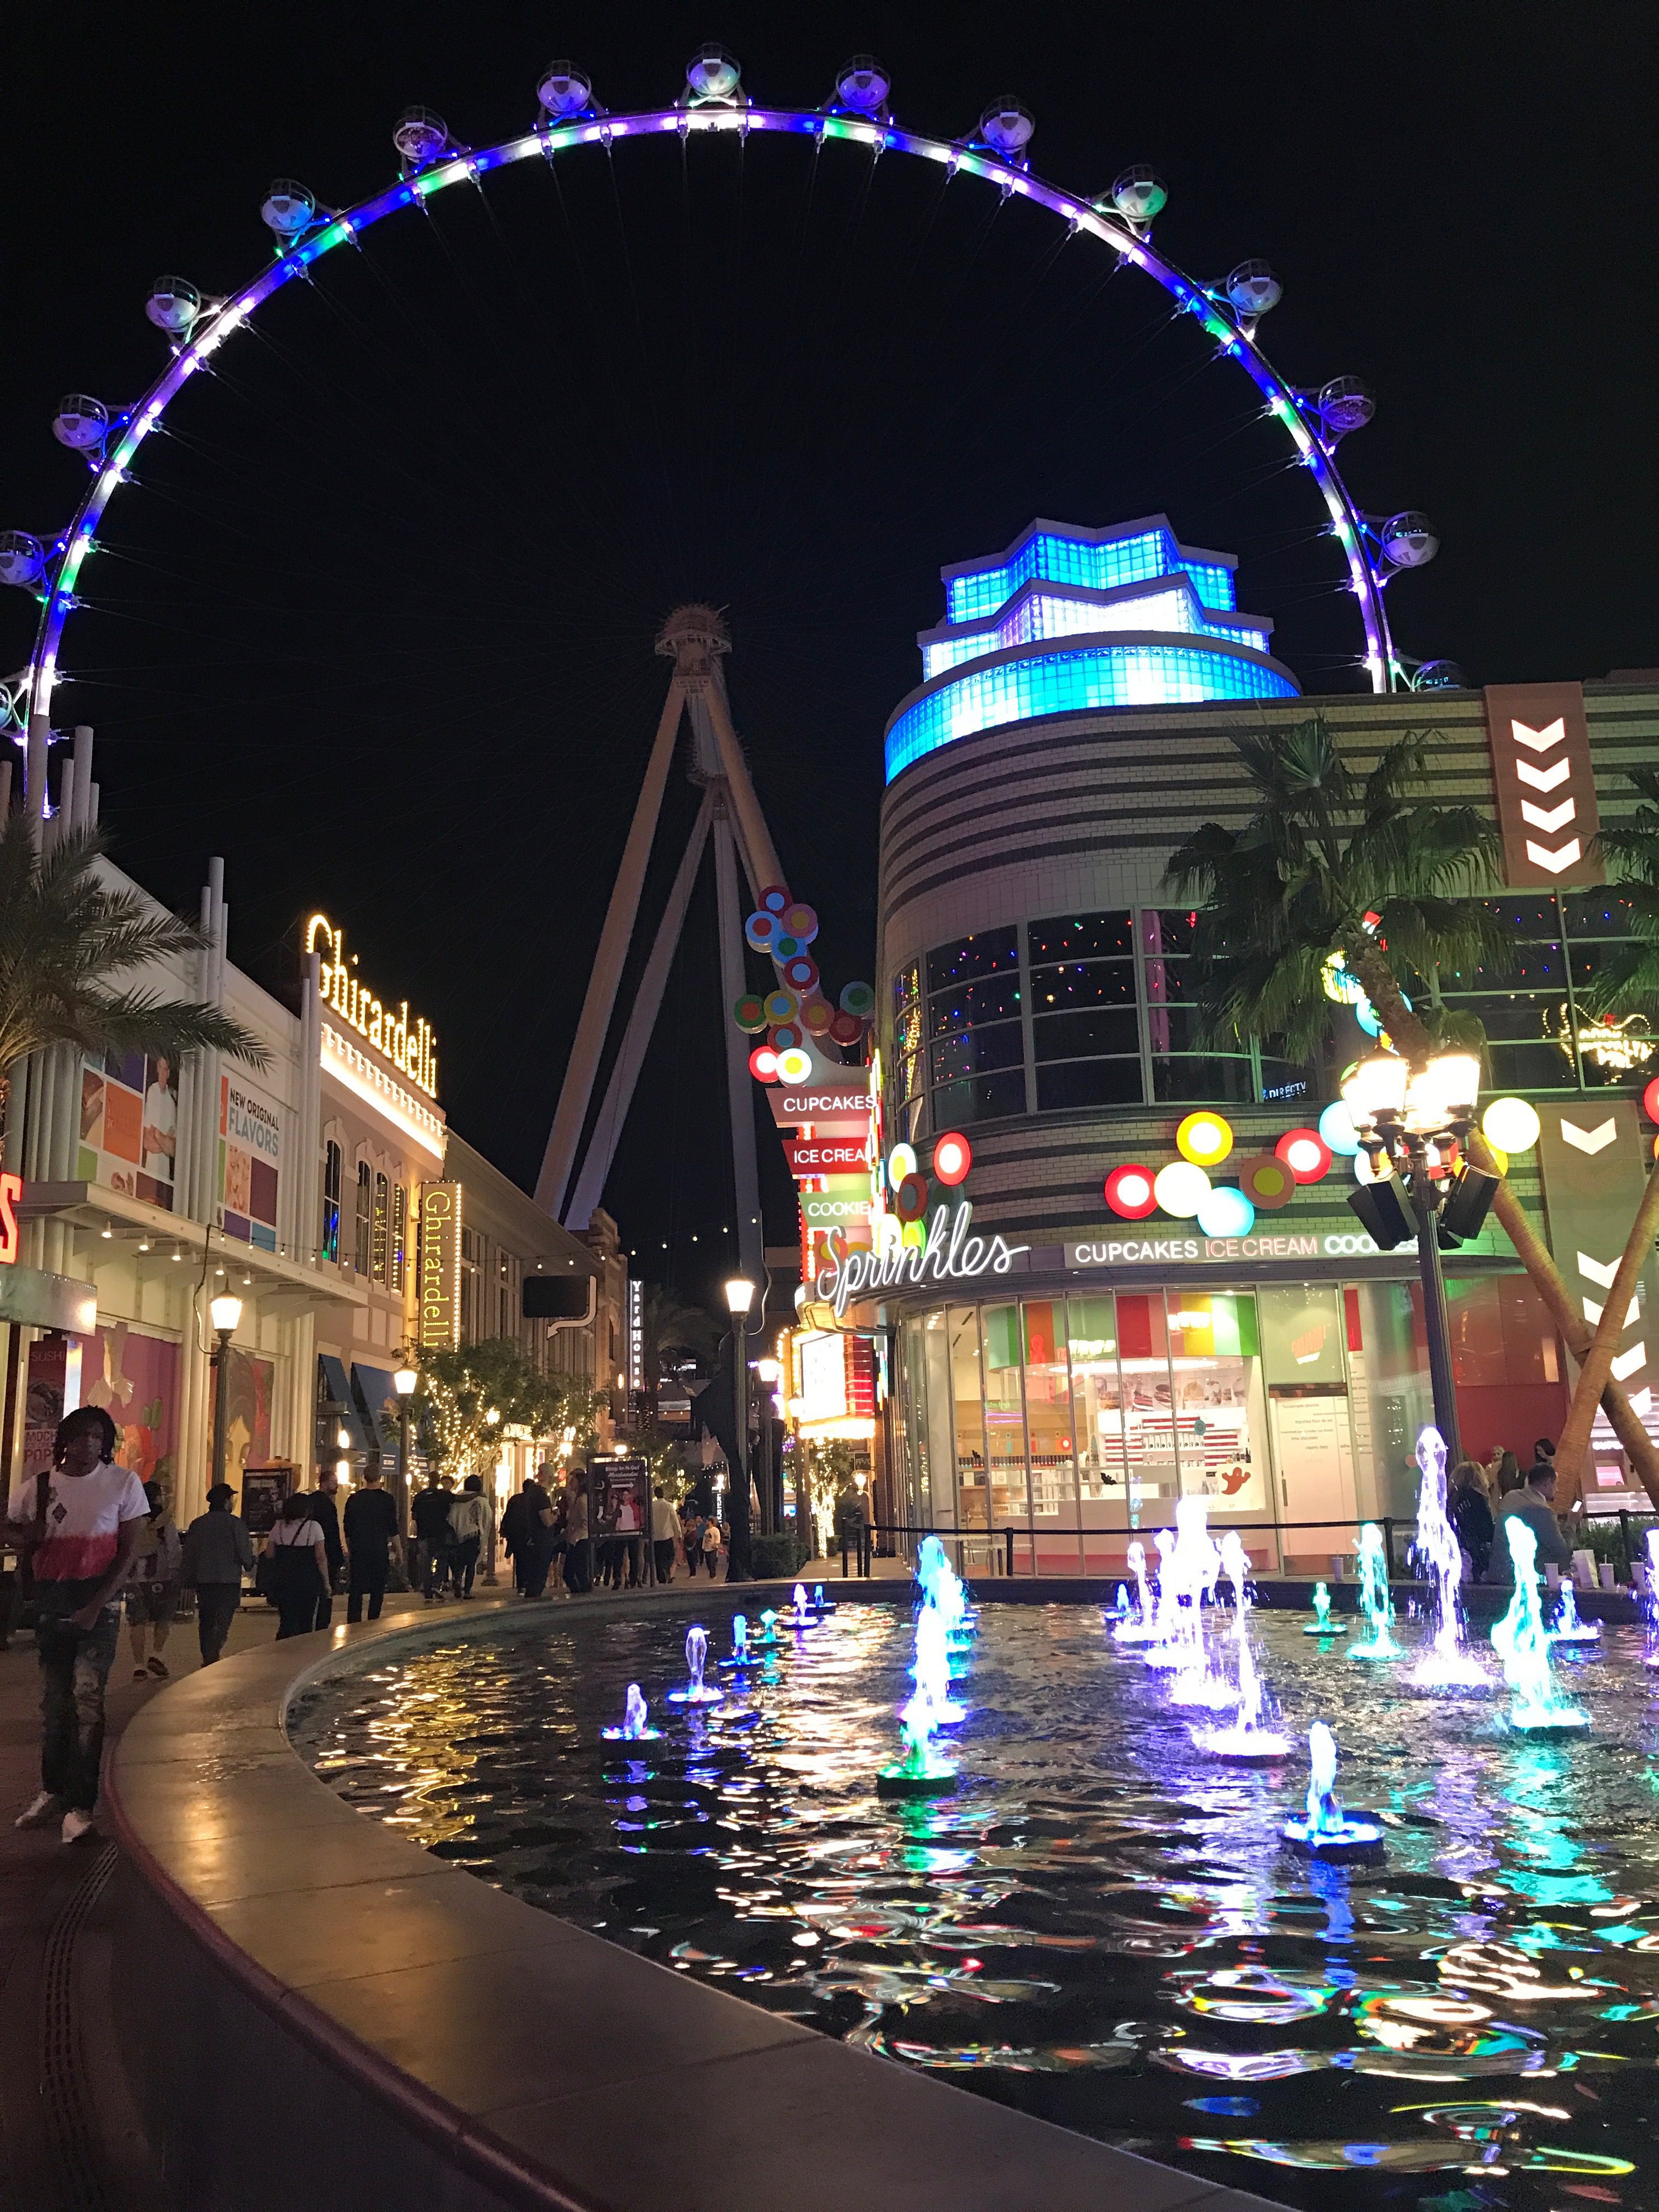 LINQ Promenade is a great place to visit in Las Vegas with kids